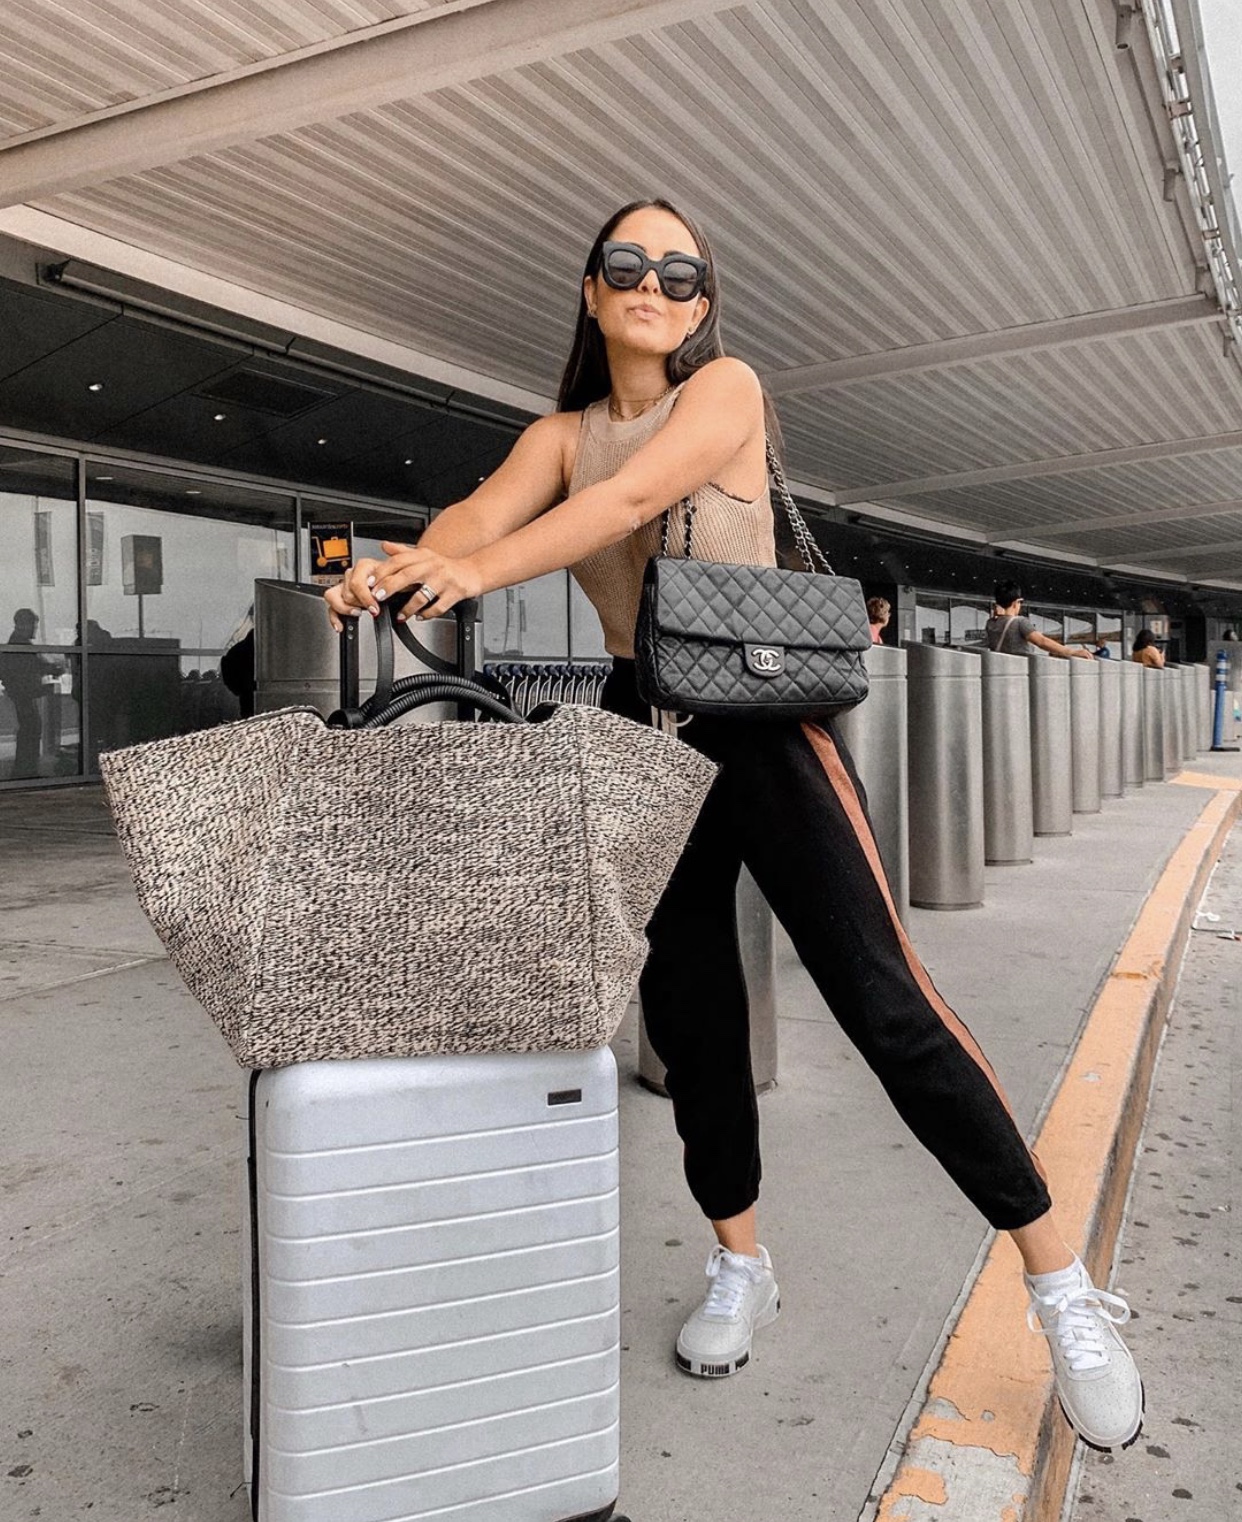 Stylish and Comfy Airport Outfit Ideas - Gabriella Zacche